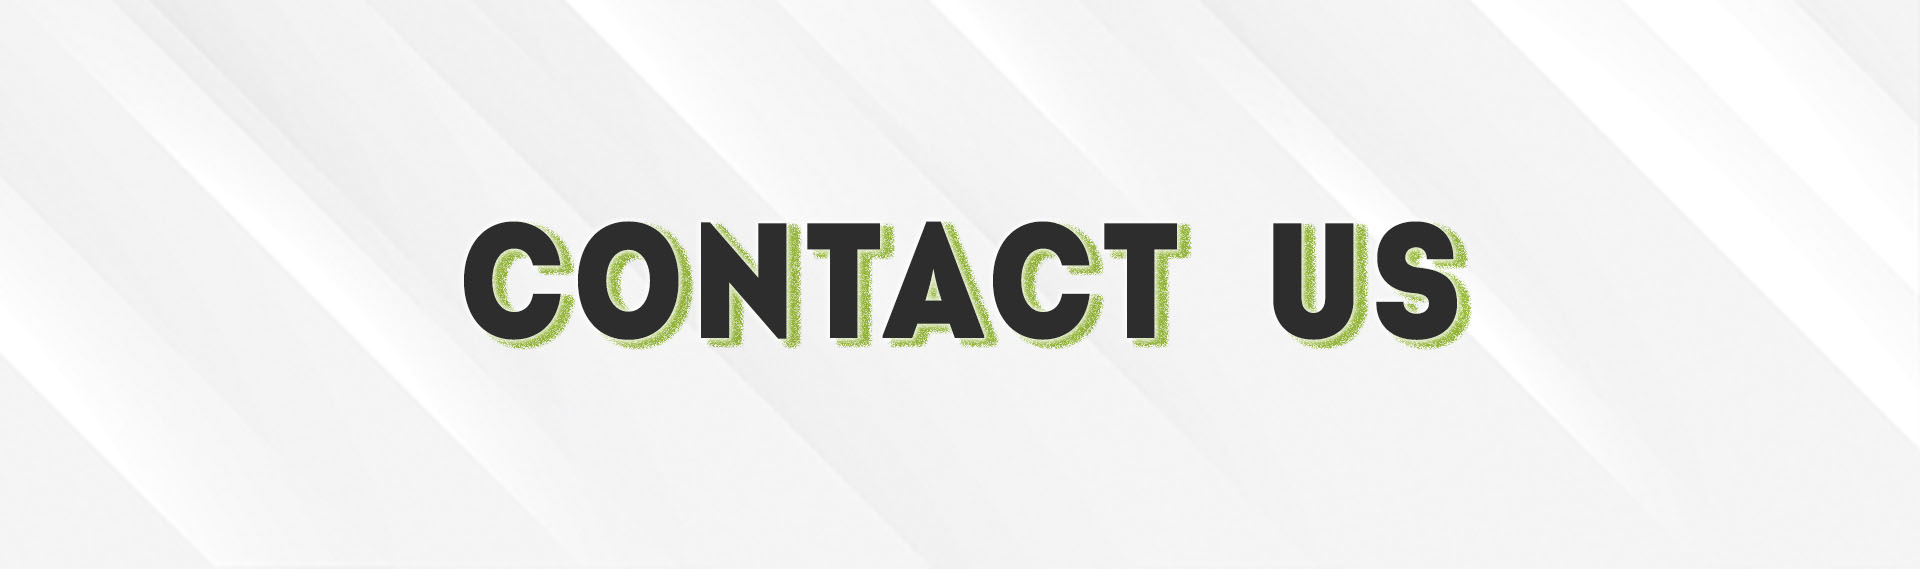 CONTACT%20US